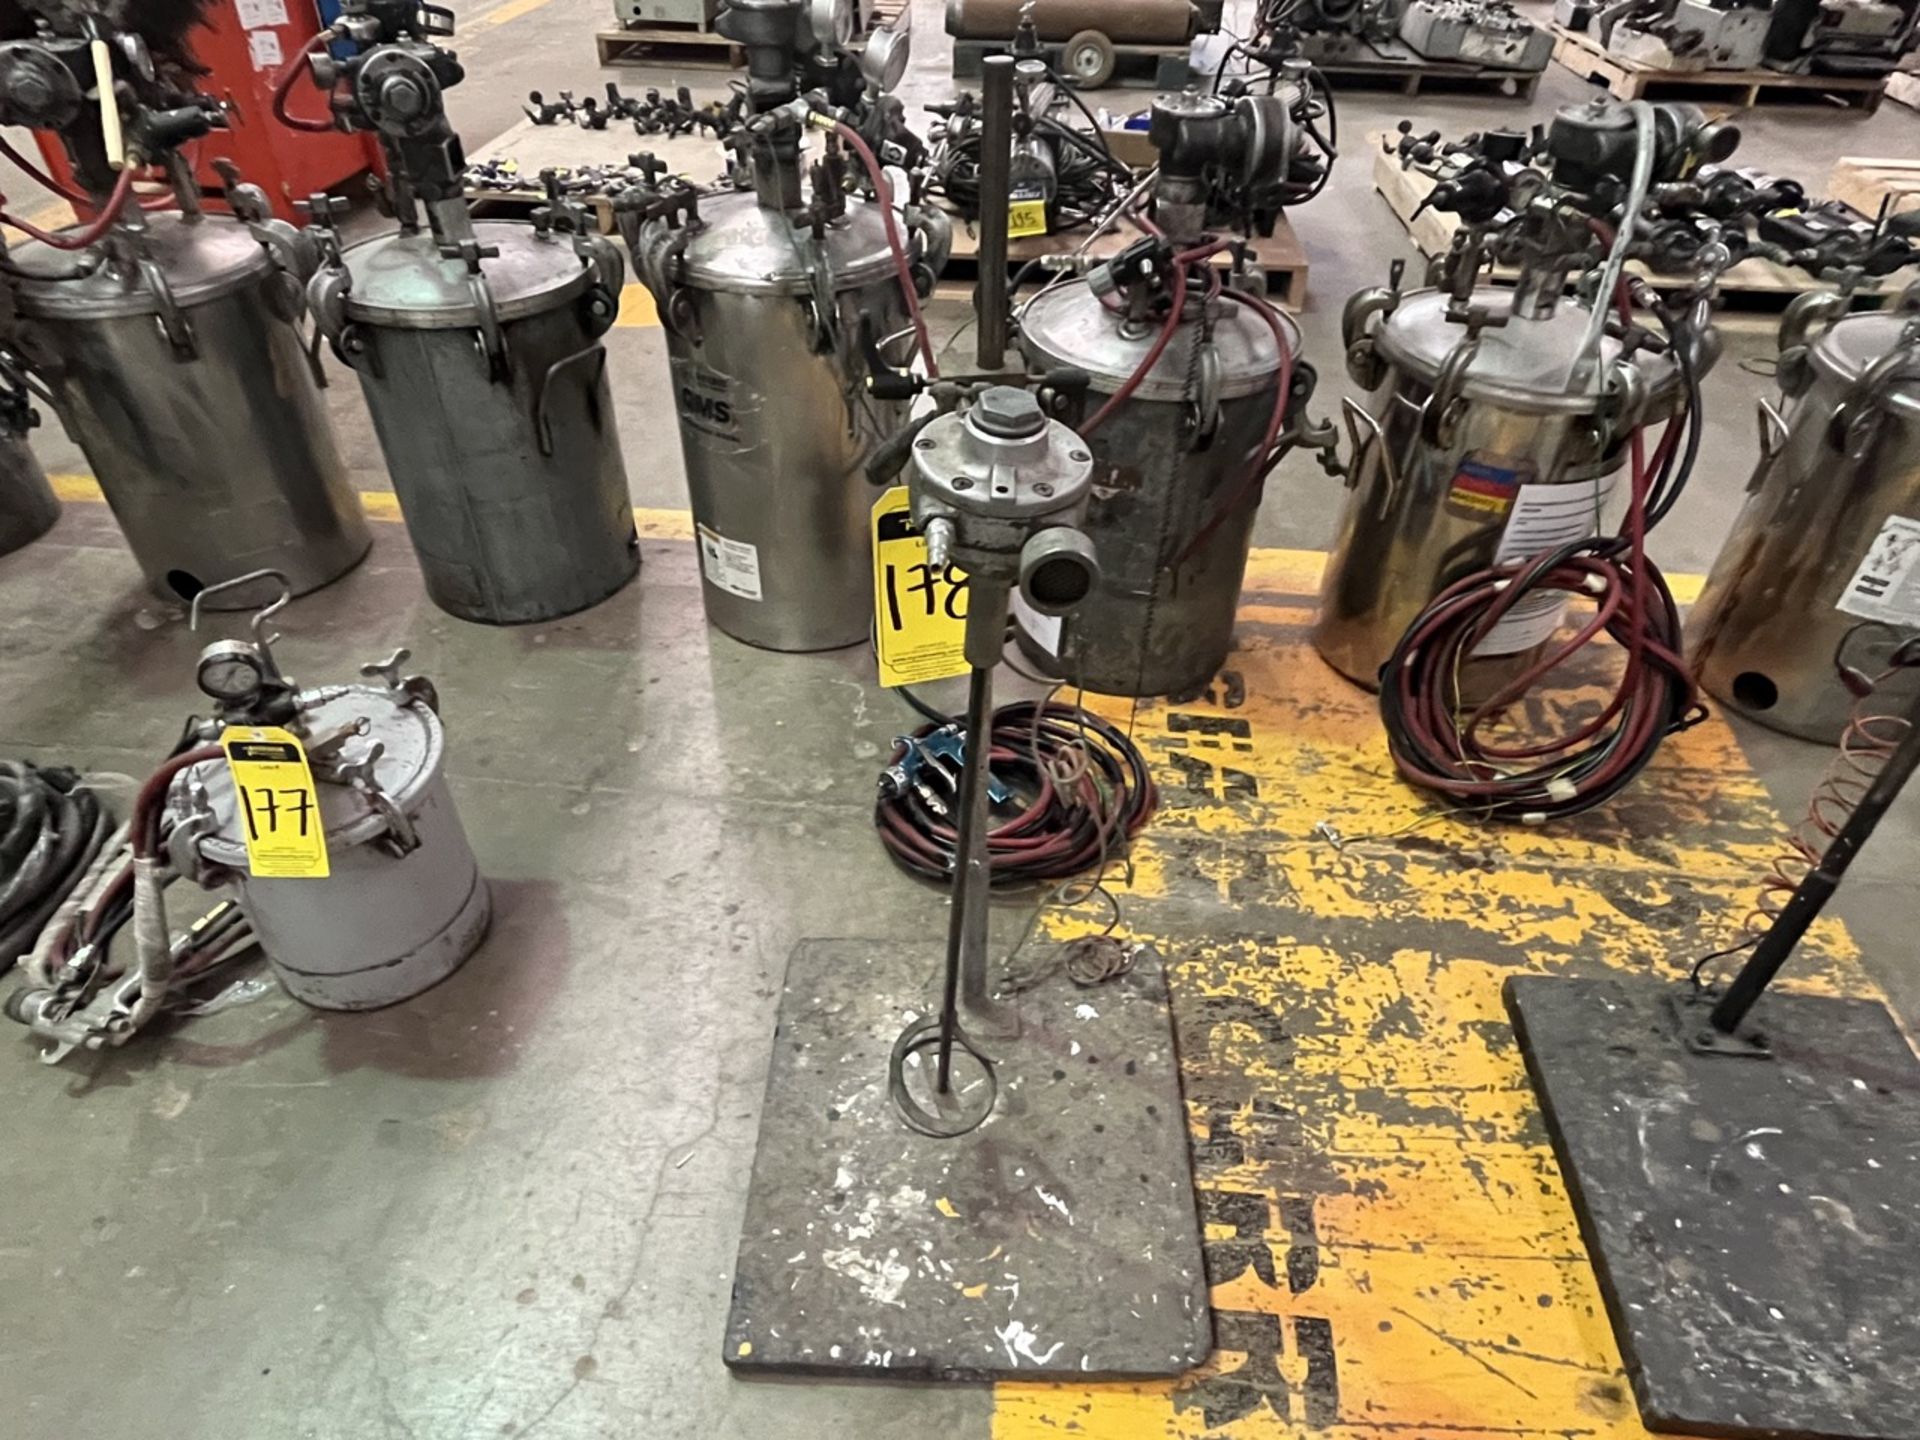 3 Pneumatic paint stirrers with base, Make ND, Serial No. SS, (please inspect). / 3 Revolvedoras ne